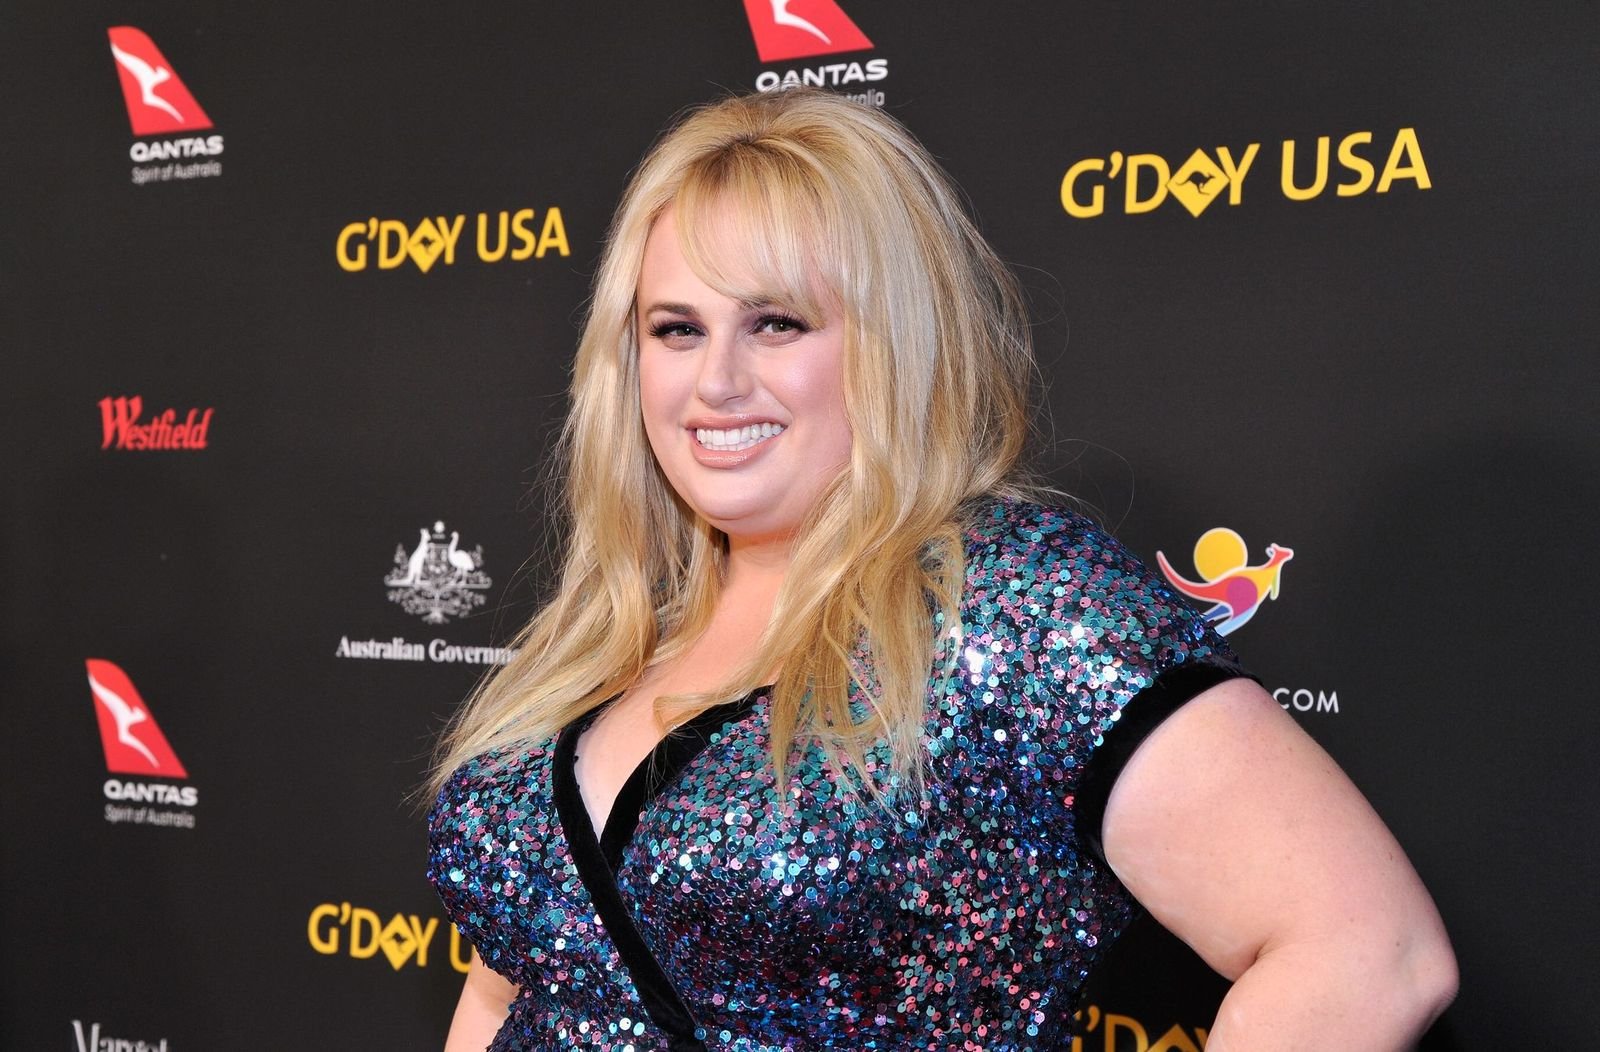 Actor Rebel Wilson at the 2018 G'Day USA Black Tie Gala at InterContinental Los Angeles Downtown on January 27, 2018 | Photo: Getty Images